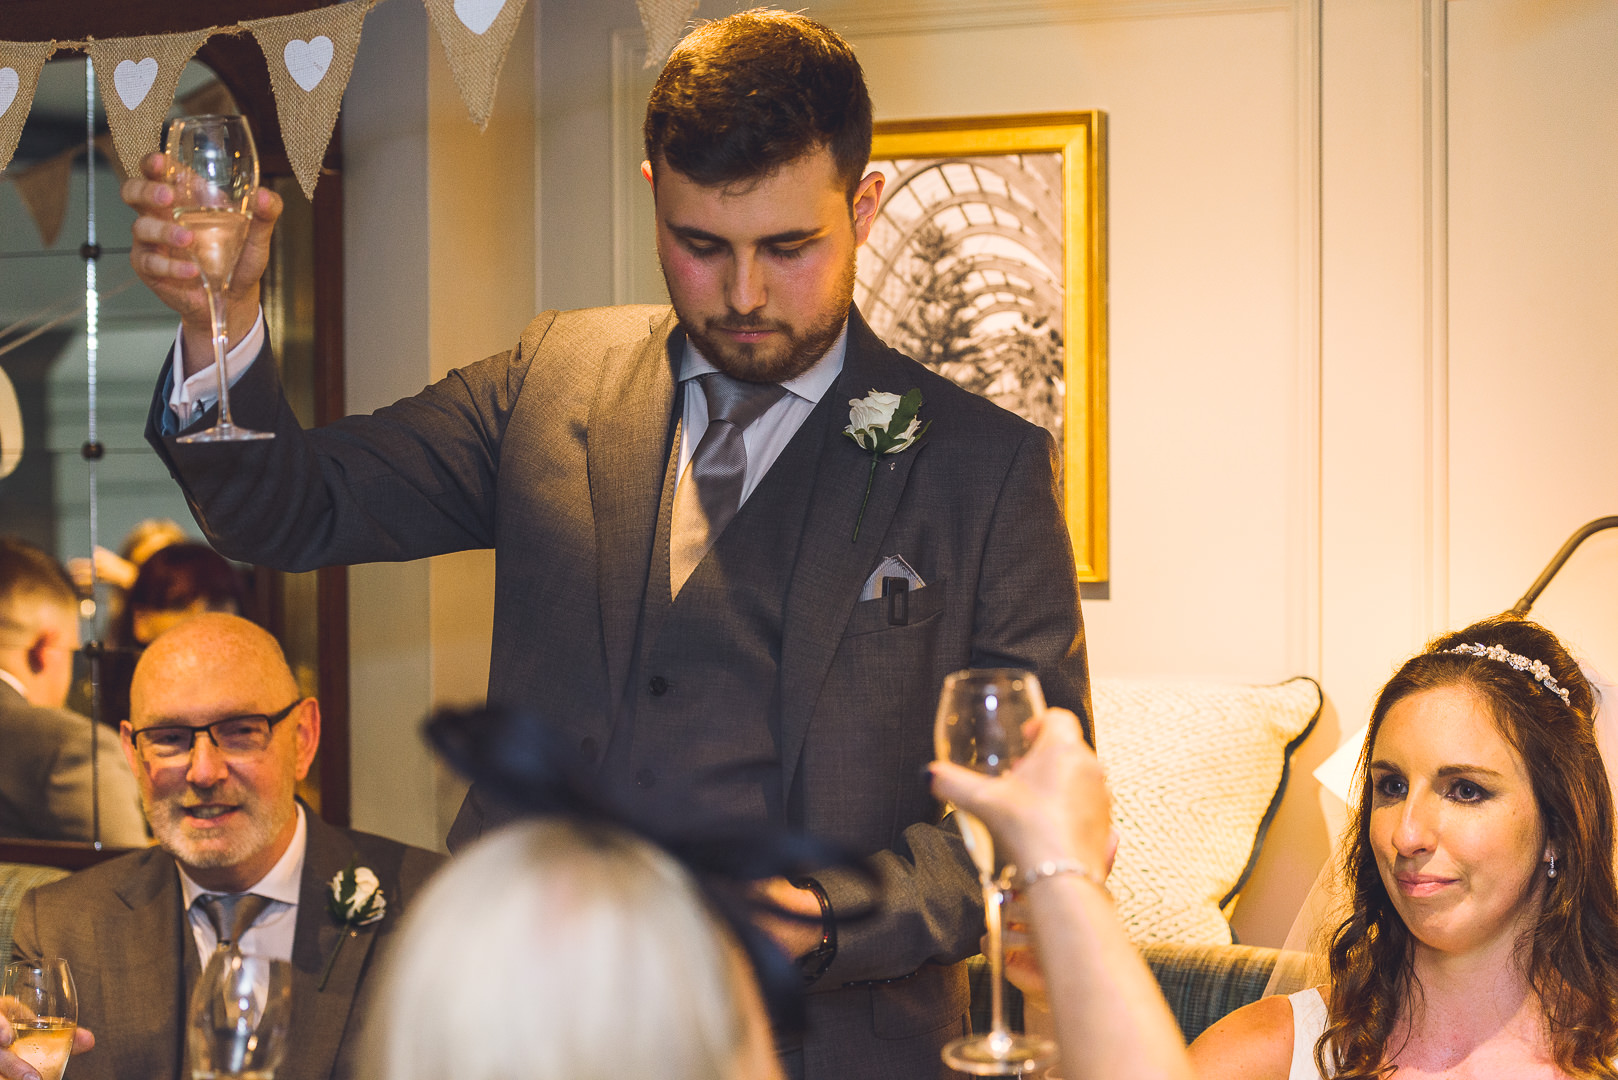 The groom raises his glass to signal a toast